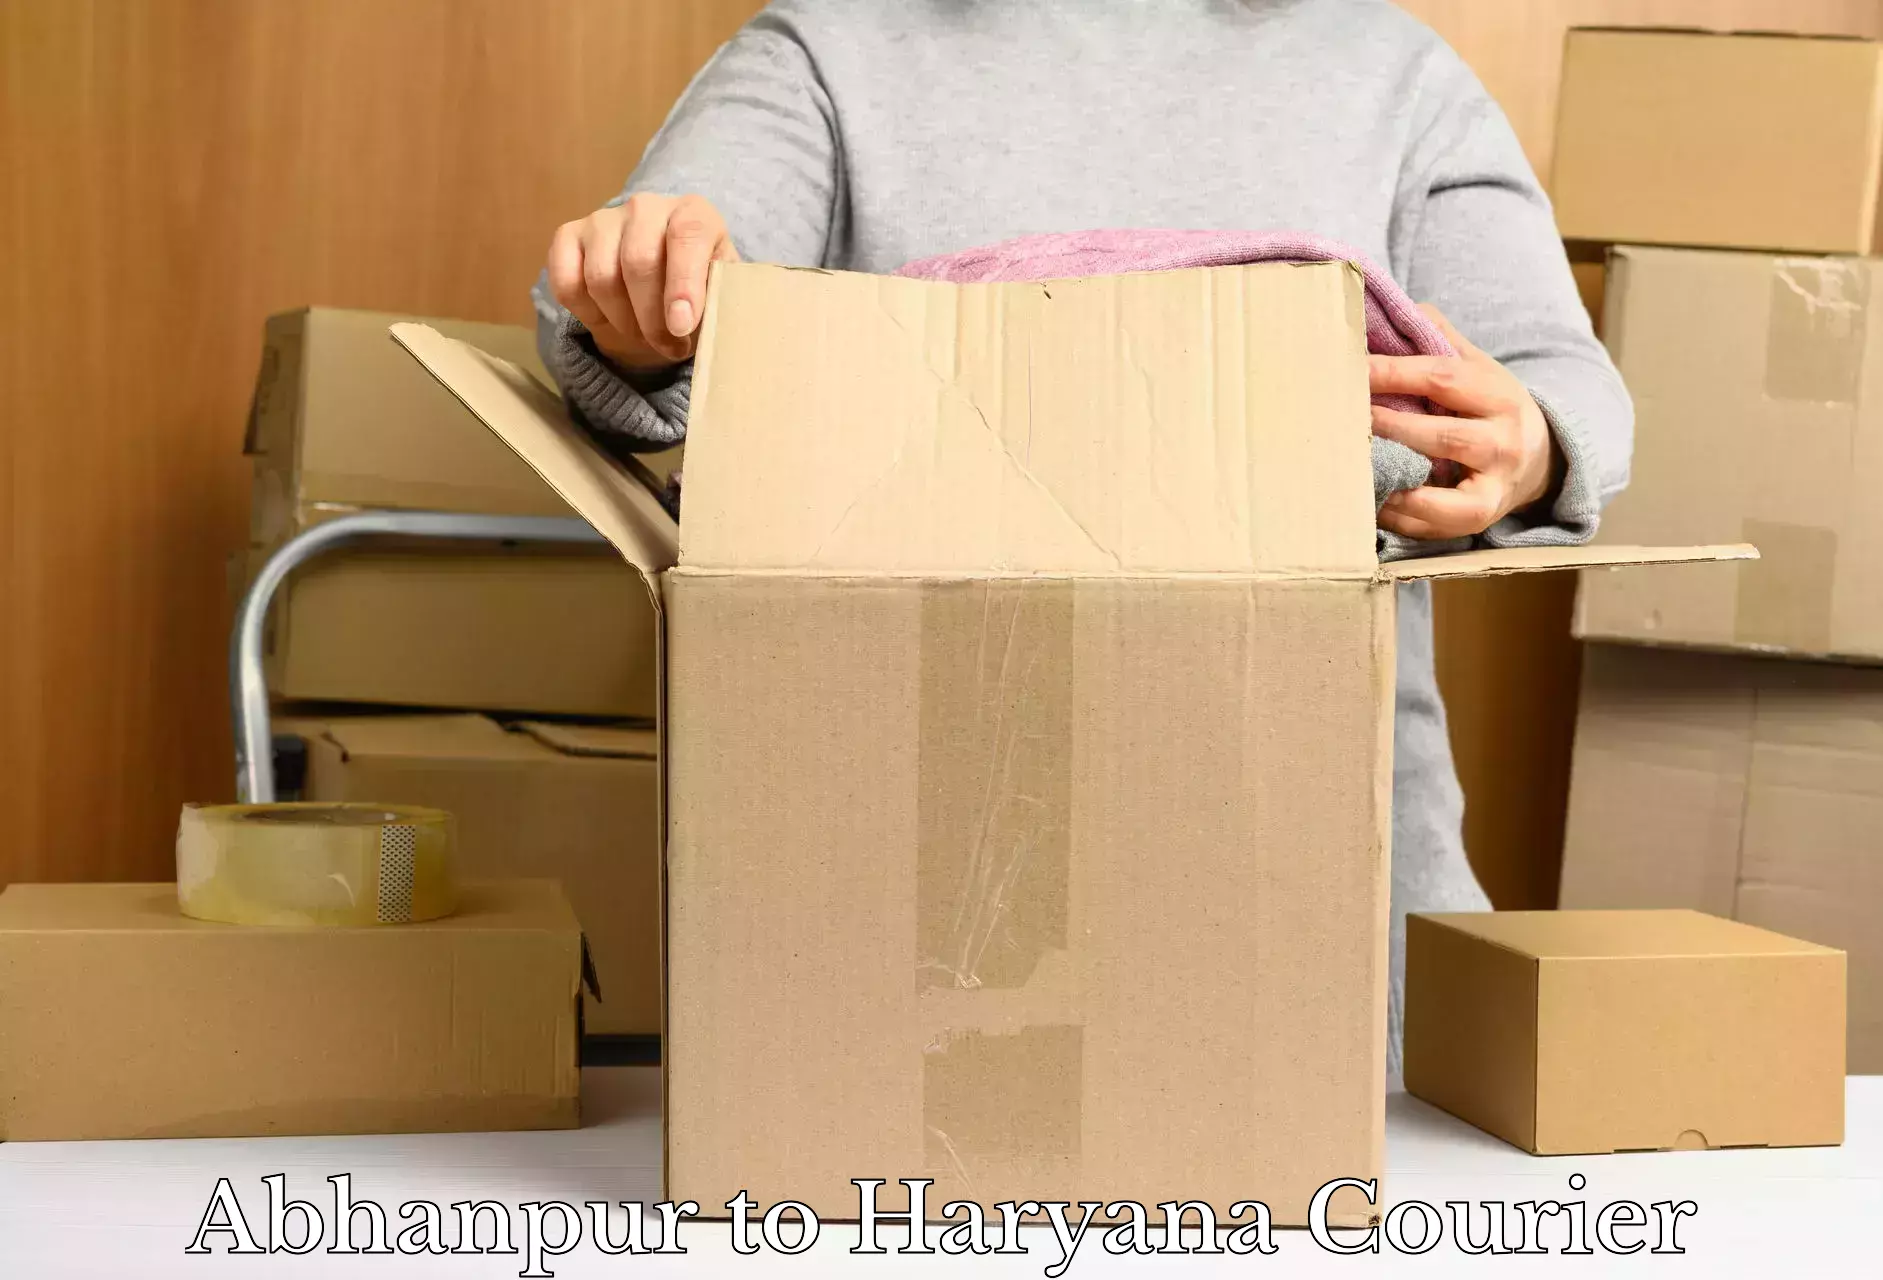 Trusted moving company Abhanpur to Pataudi